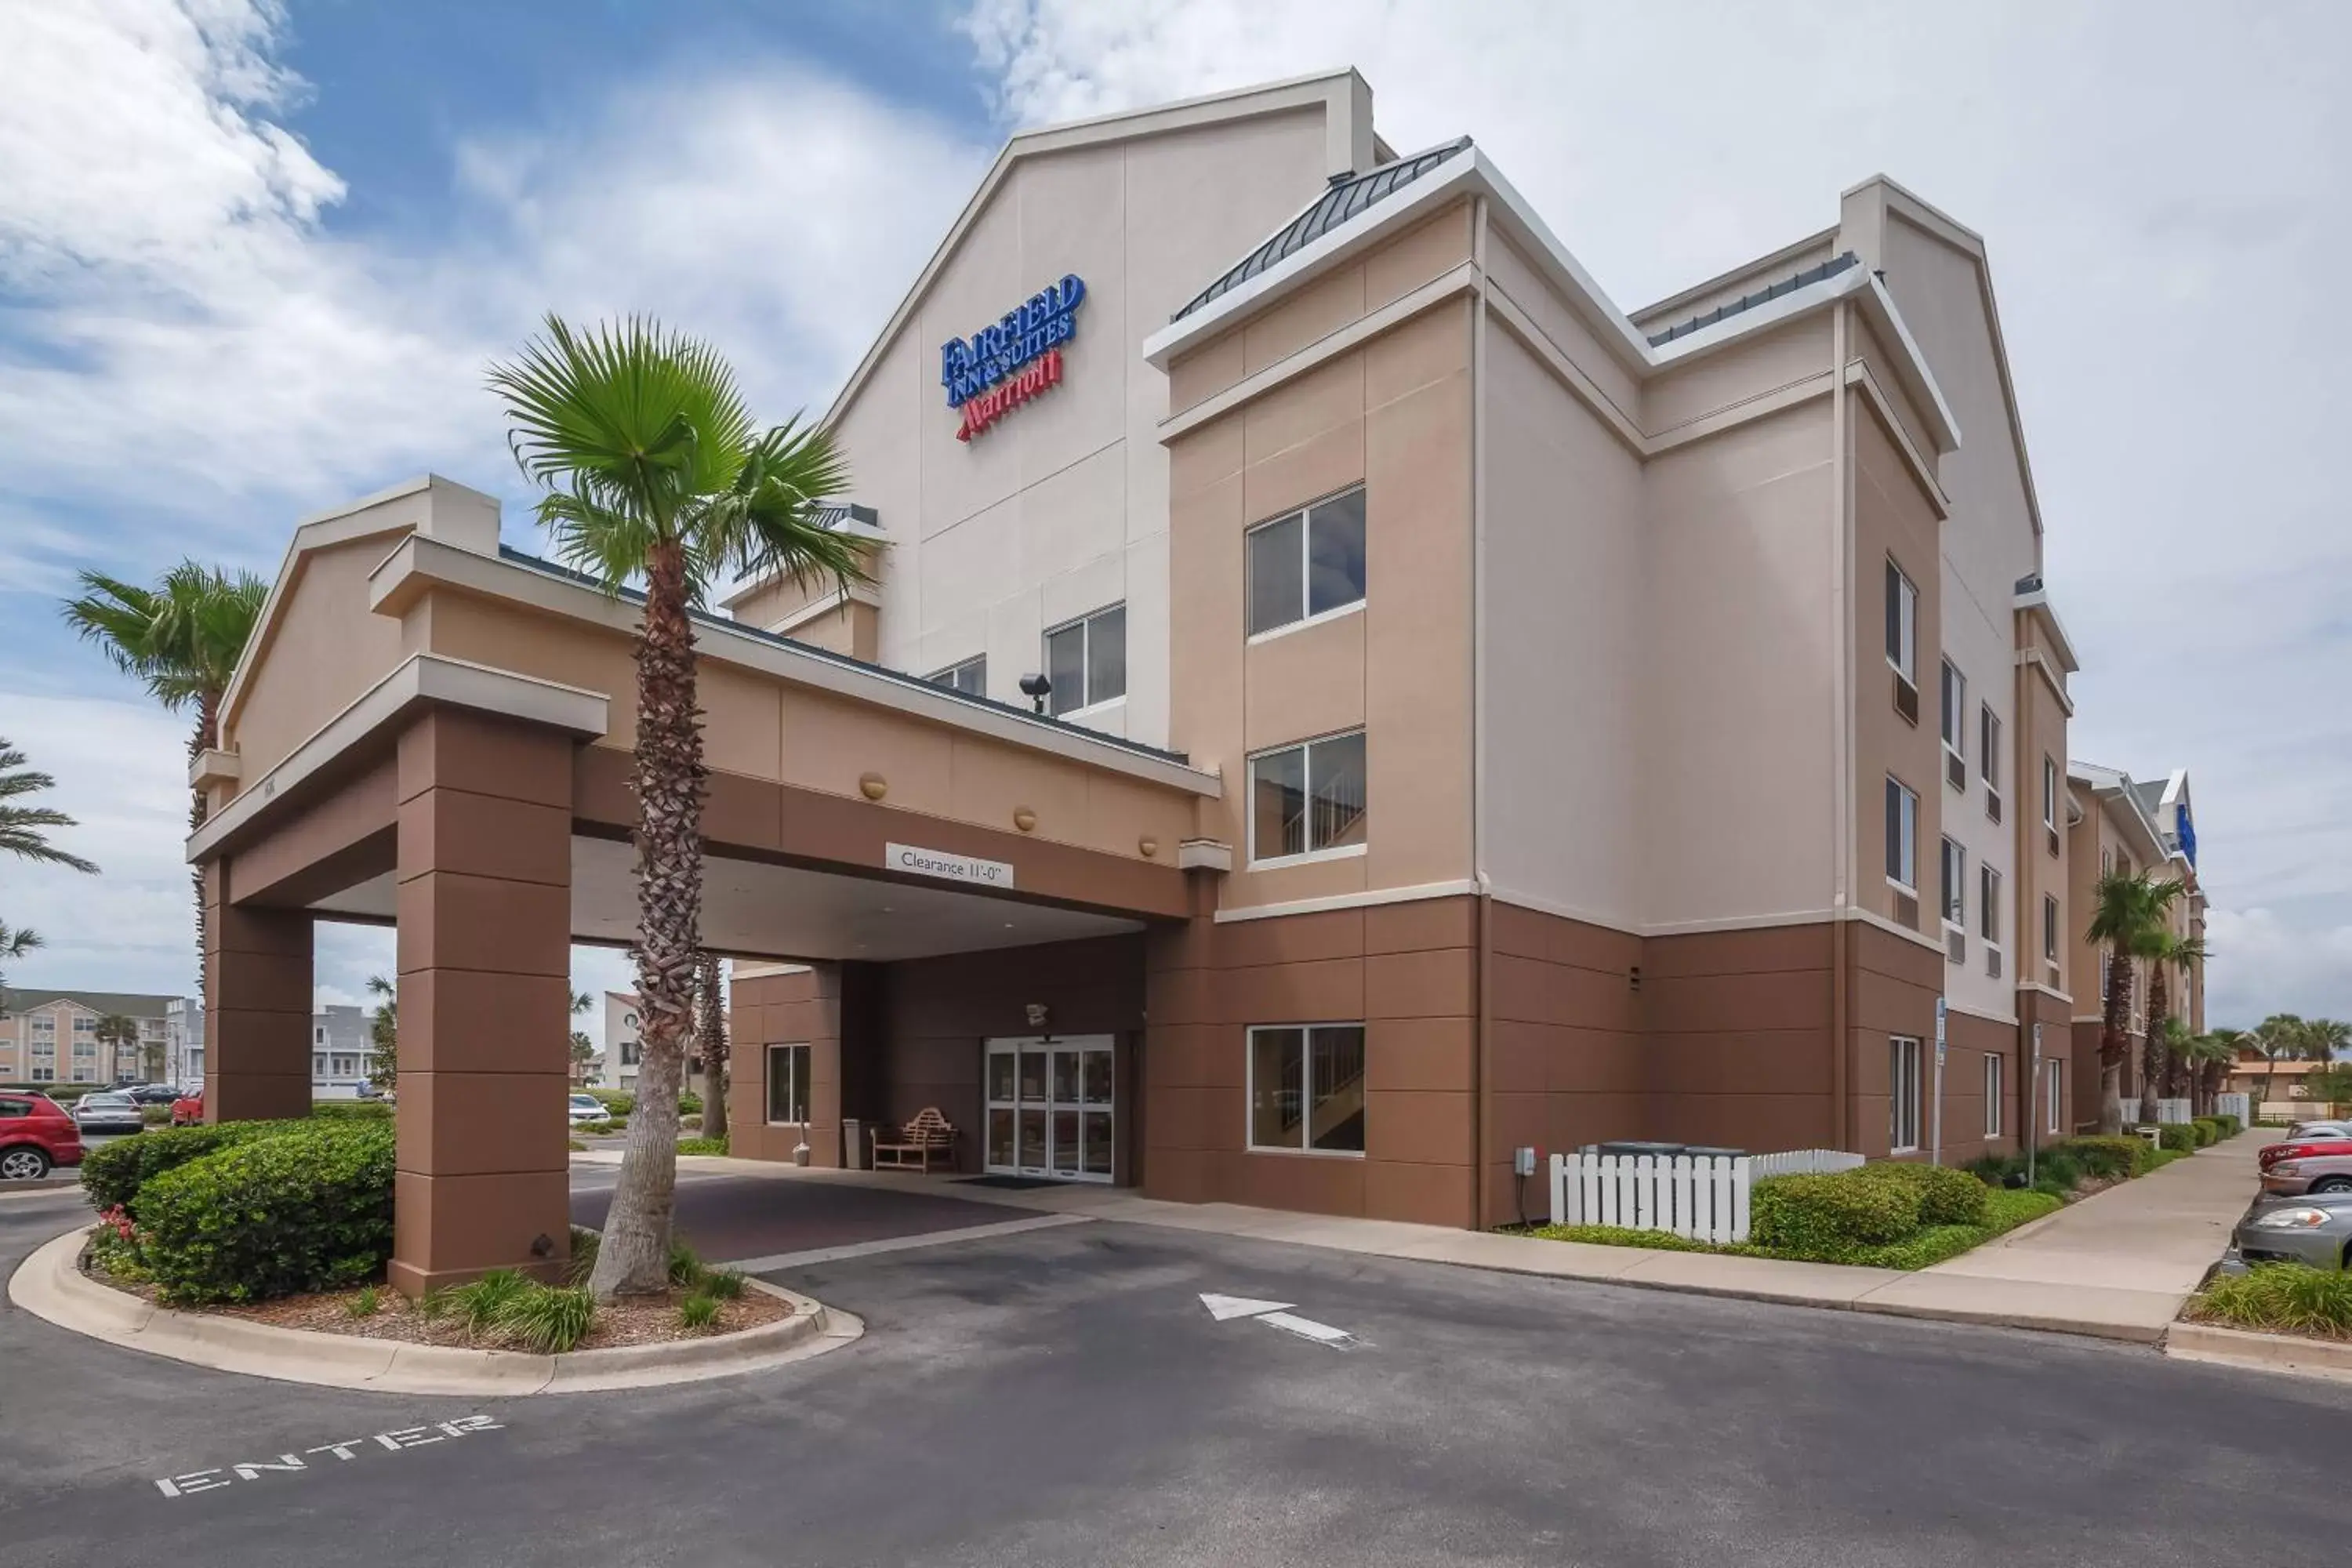 Property Building in Fairfield Inn and Suites Jacksonville Beach